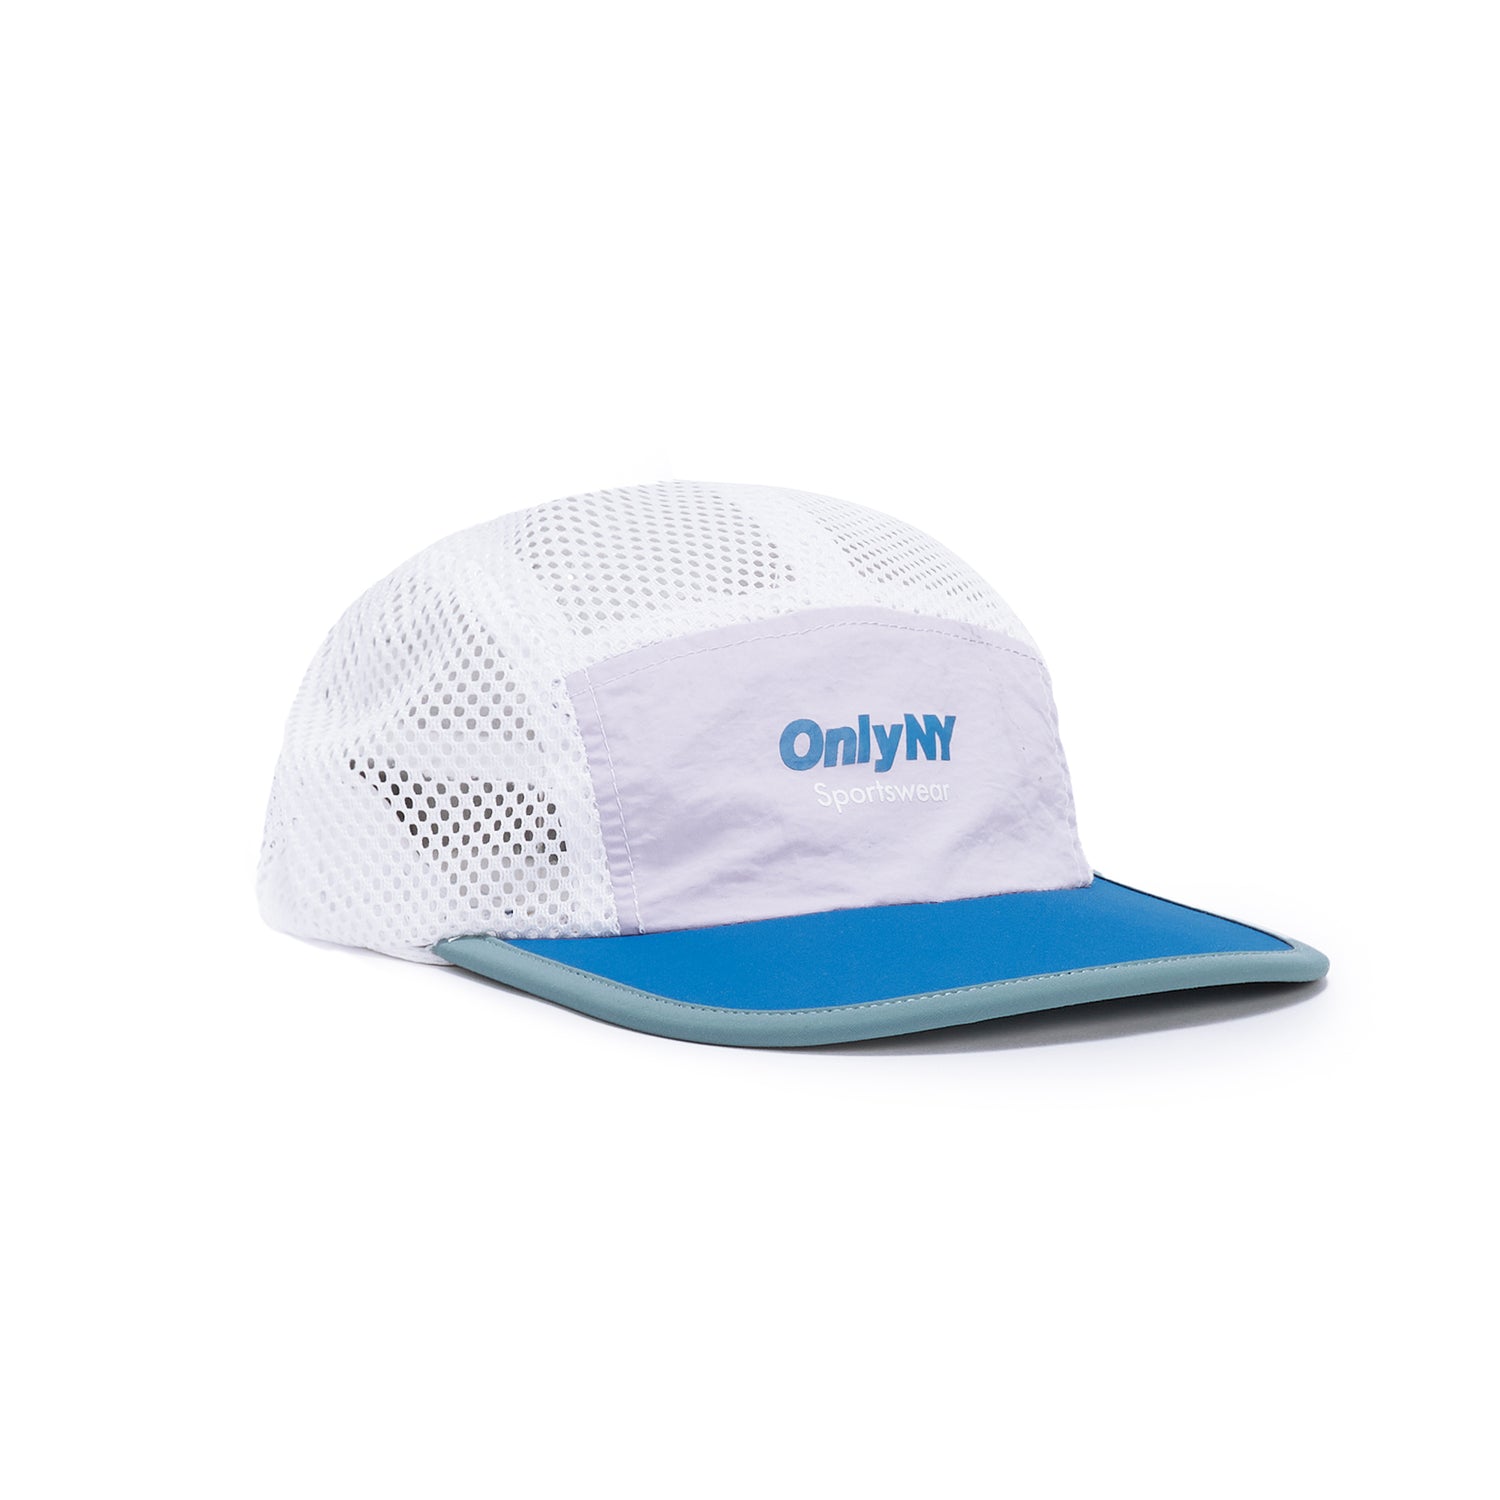 Only NY Sportswear Mesh 5-Panel Hat - White/Lilac